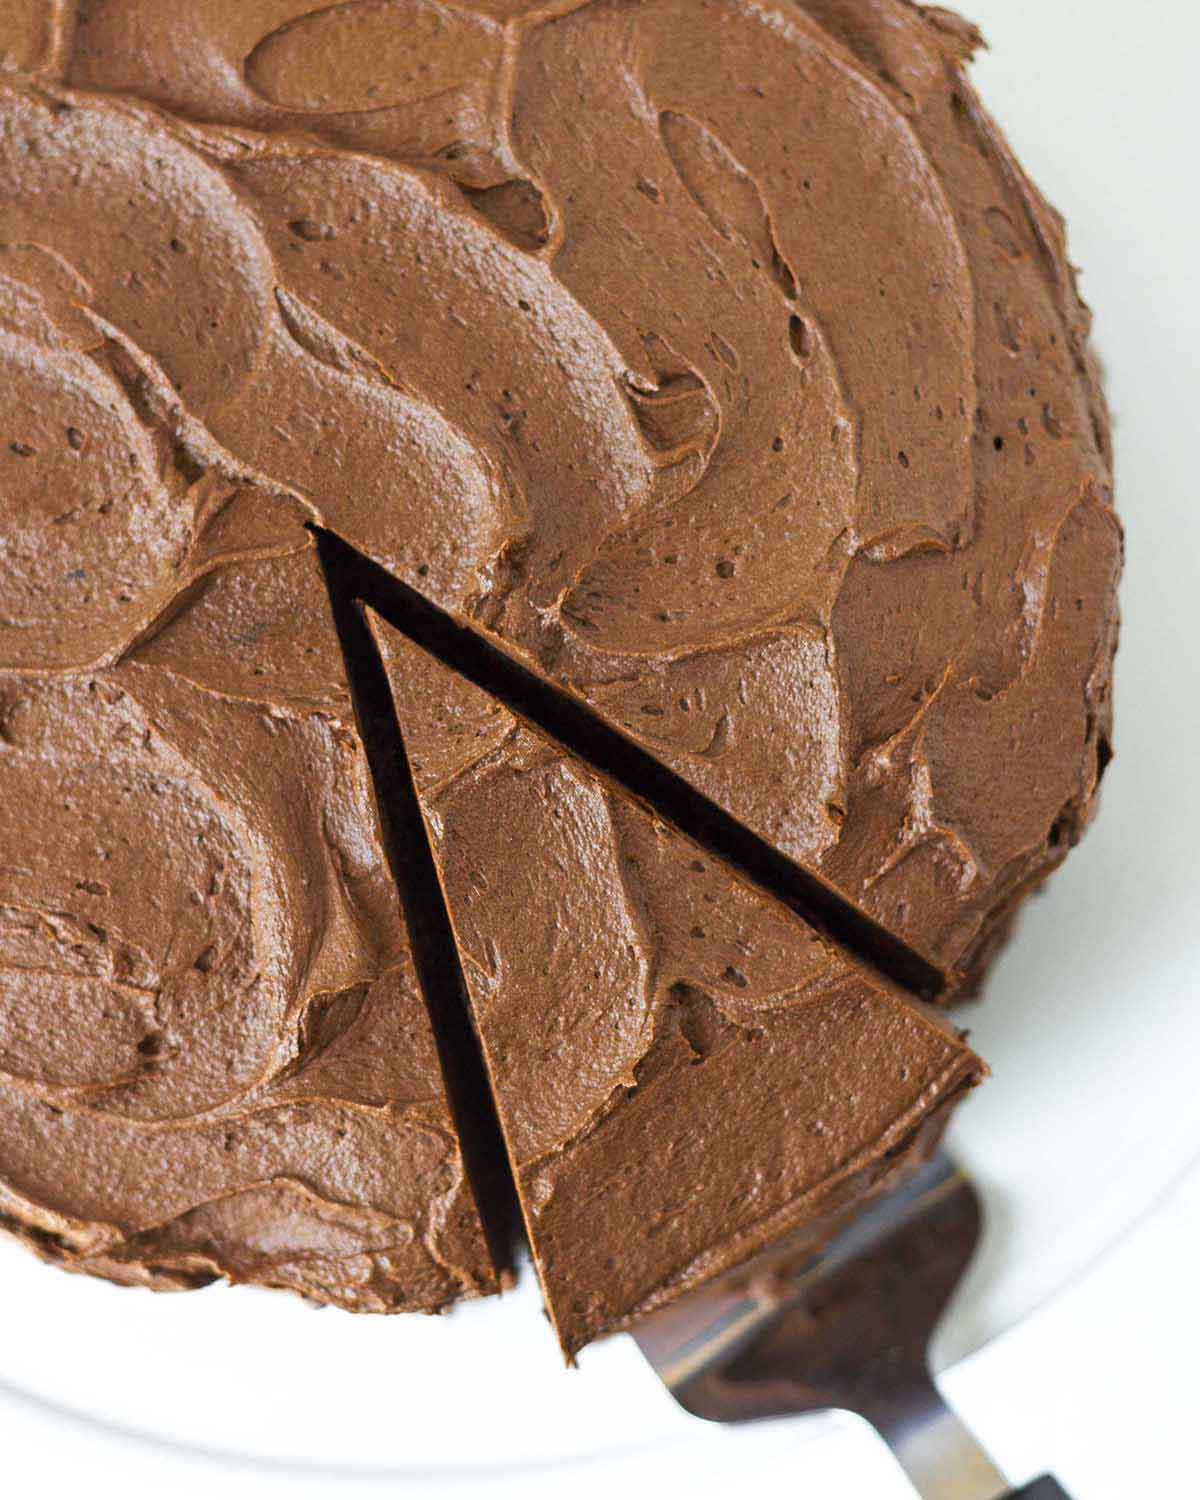 An overhead shot showing a frosted chocolate cake with a slice cut out and being pulled away with a cake server.